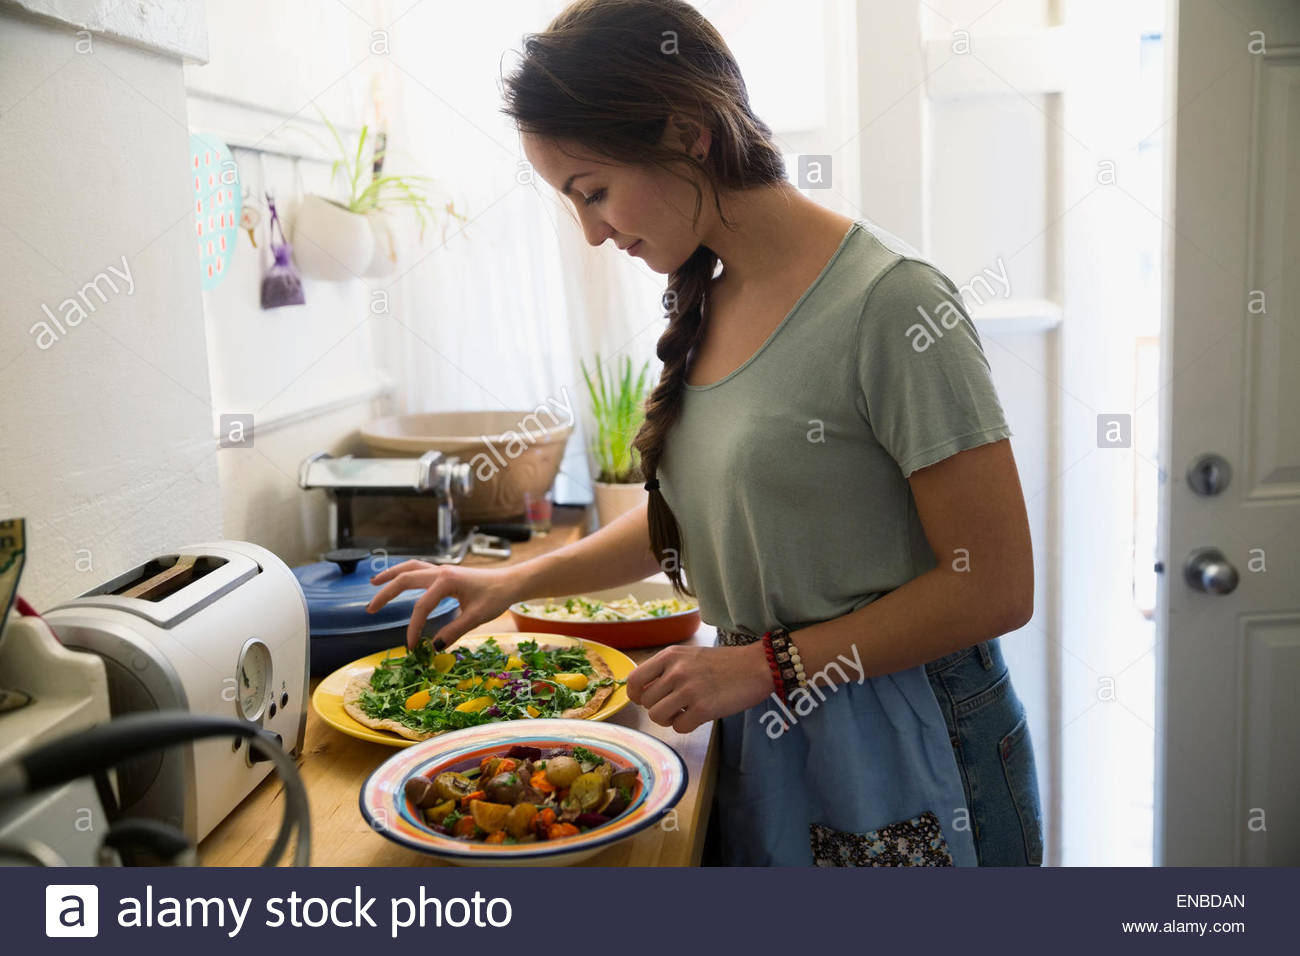 Woman cooking in kitchen Stock Photo